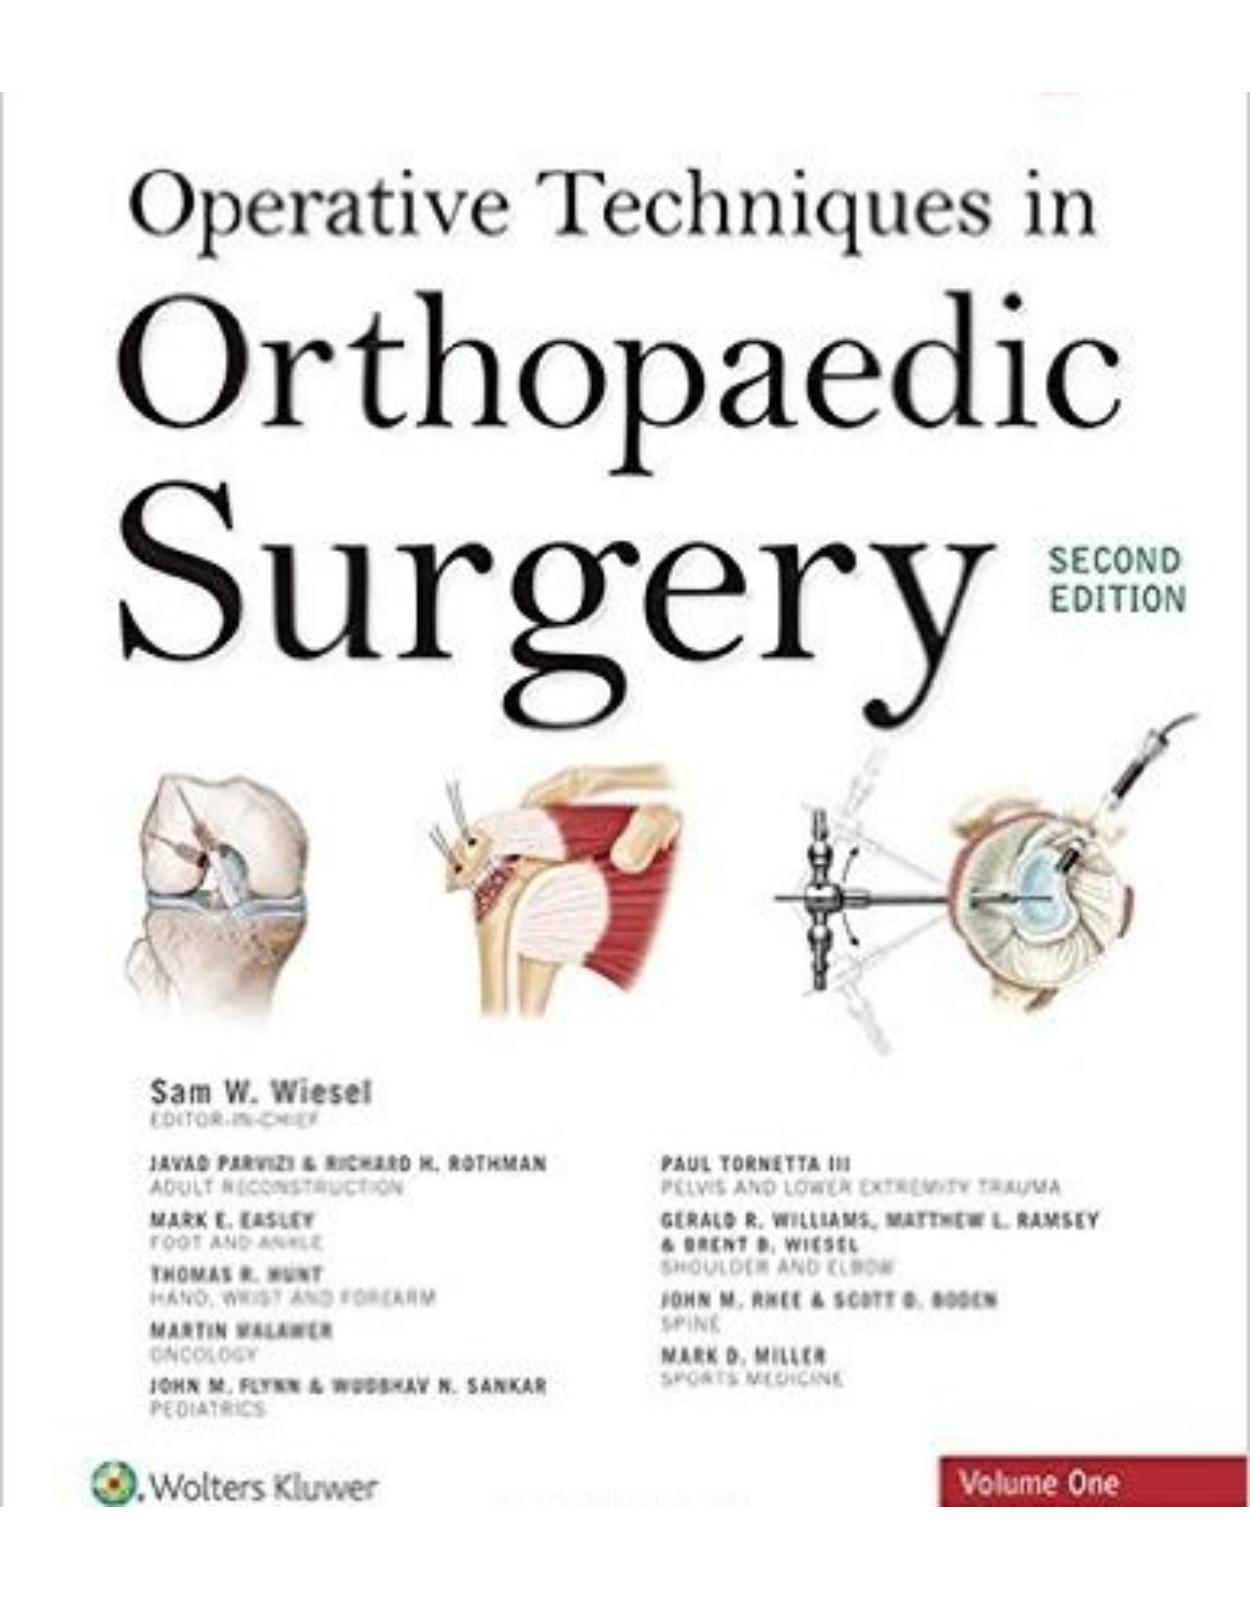 Operative Techniques in Orthopaedic Surgery (Four Volume Set) Second Edition